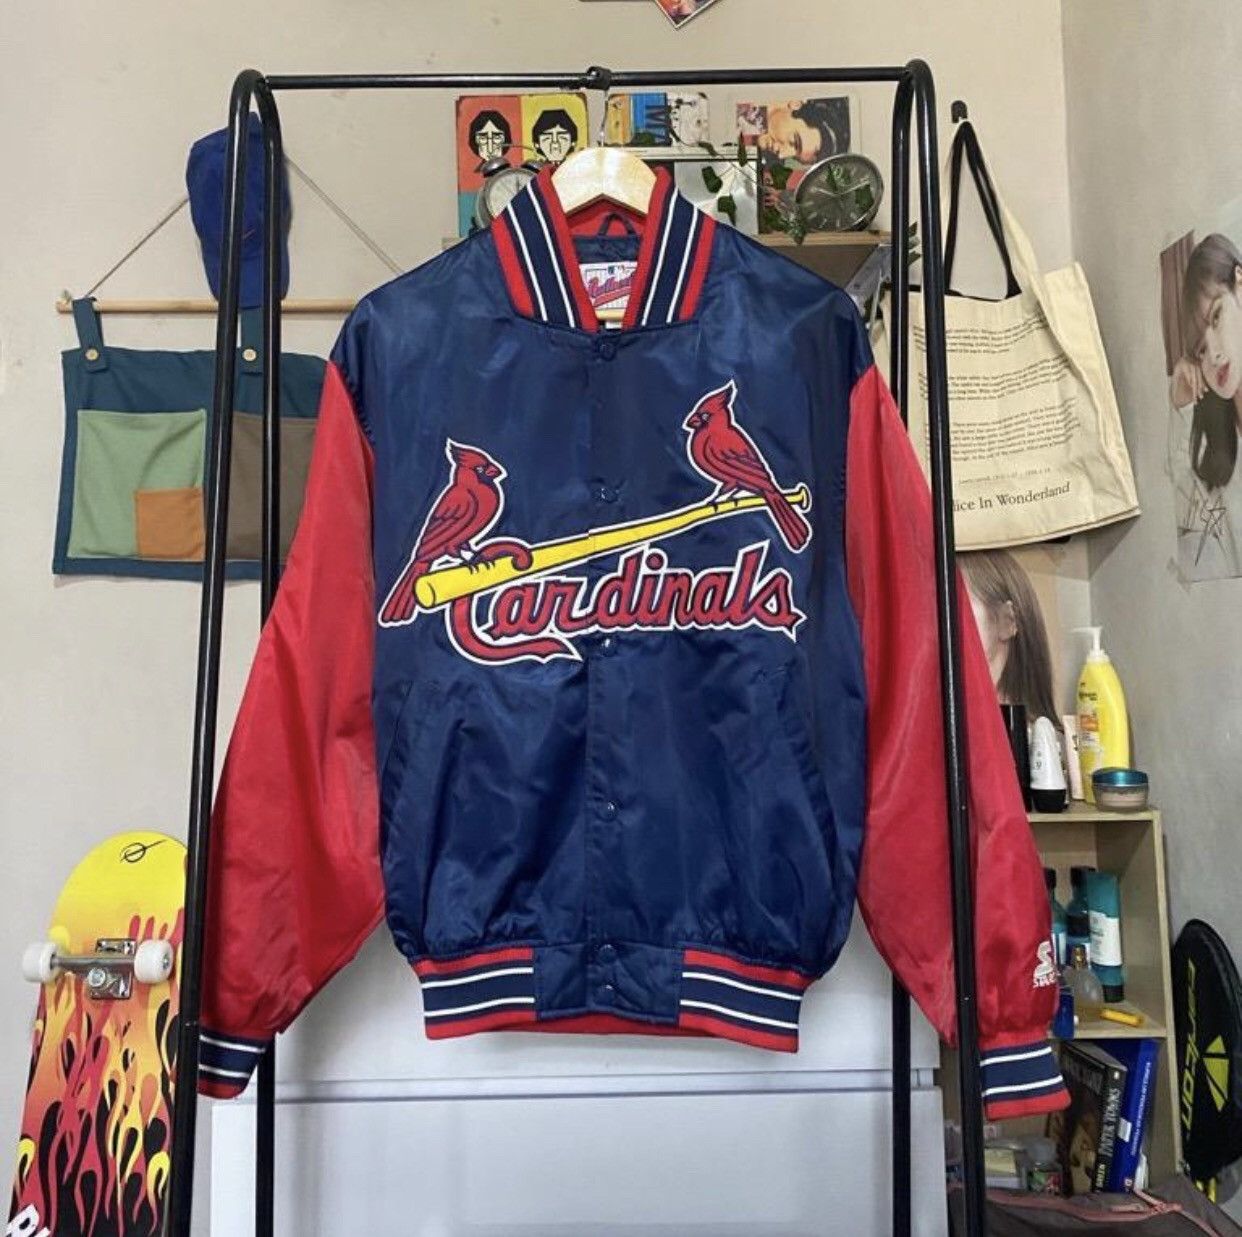 🔥Vintage MLB ST. LOUIS CARDINALS X STARTER VARSITY JACKET, Men's Fashion,  Coats, Jackets and Outerwear on Carousell